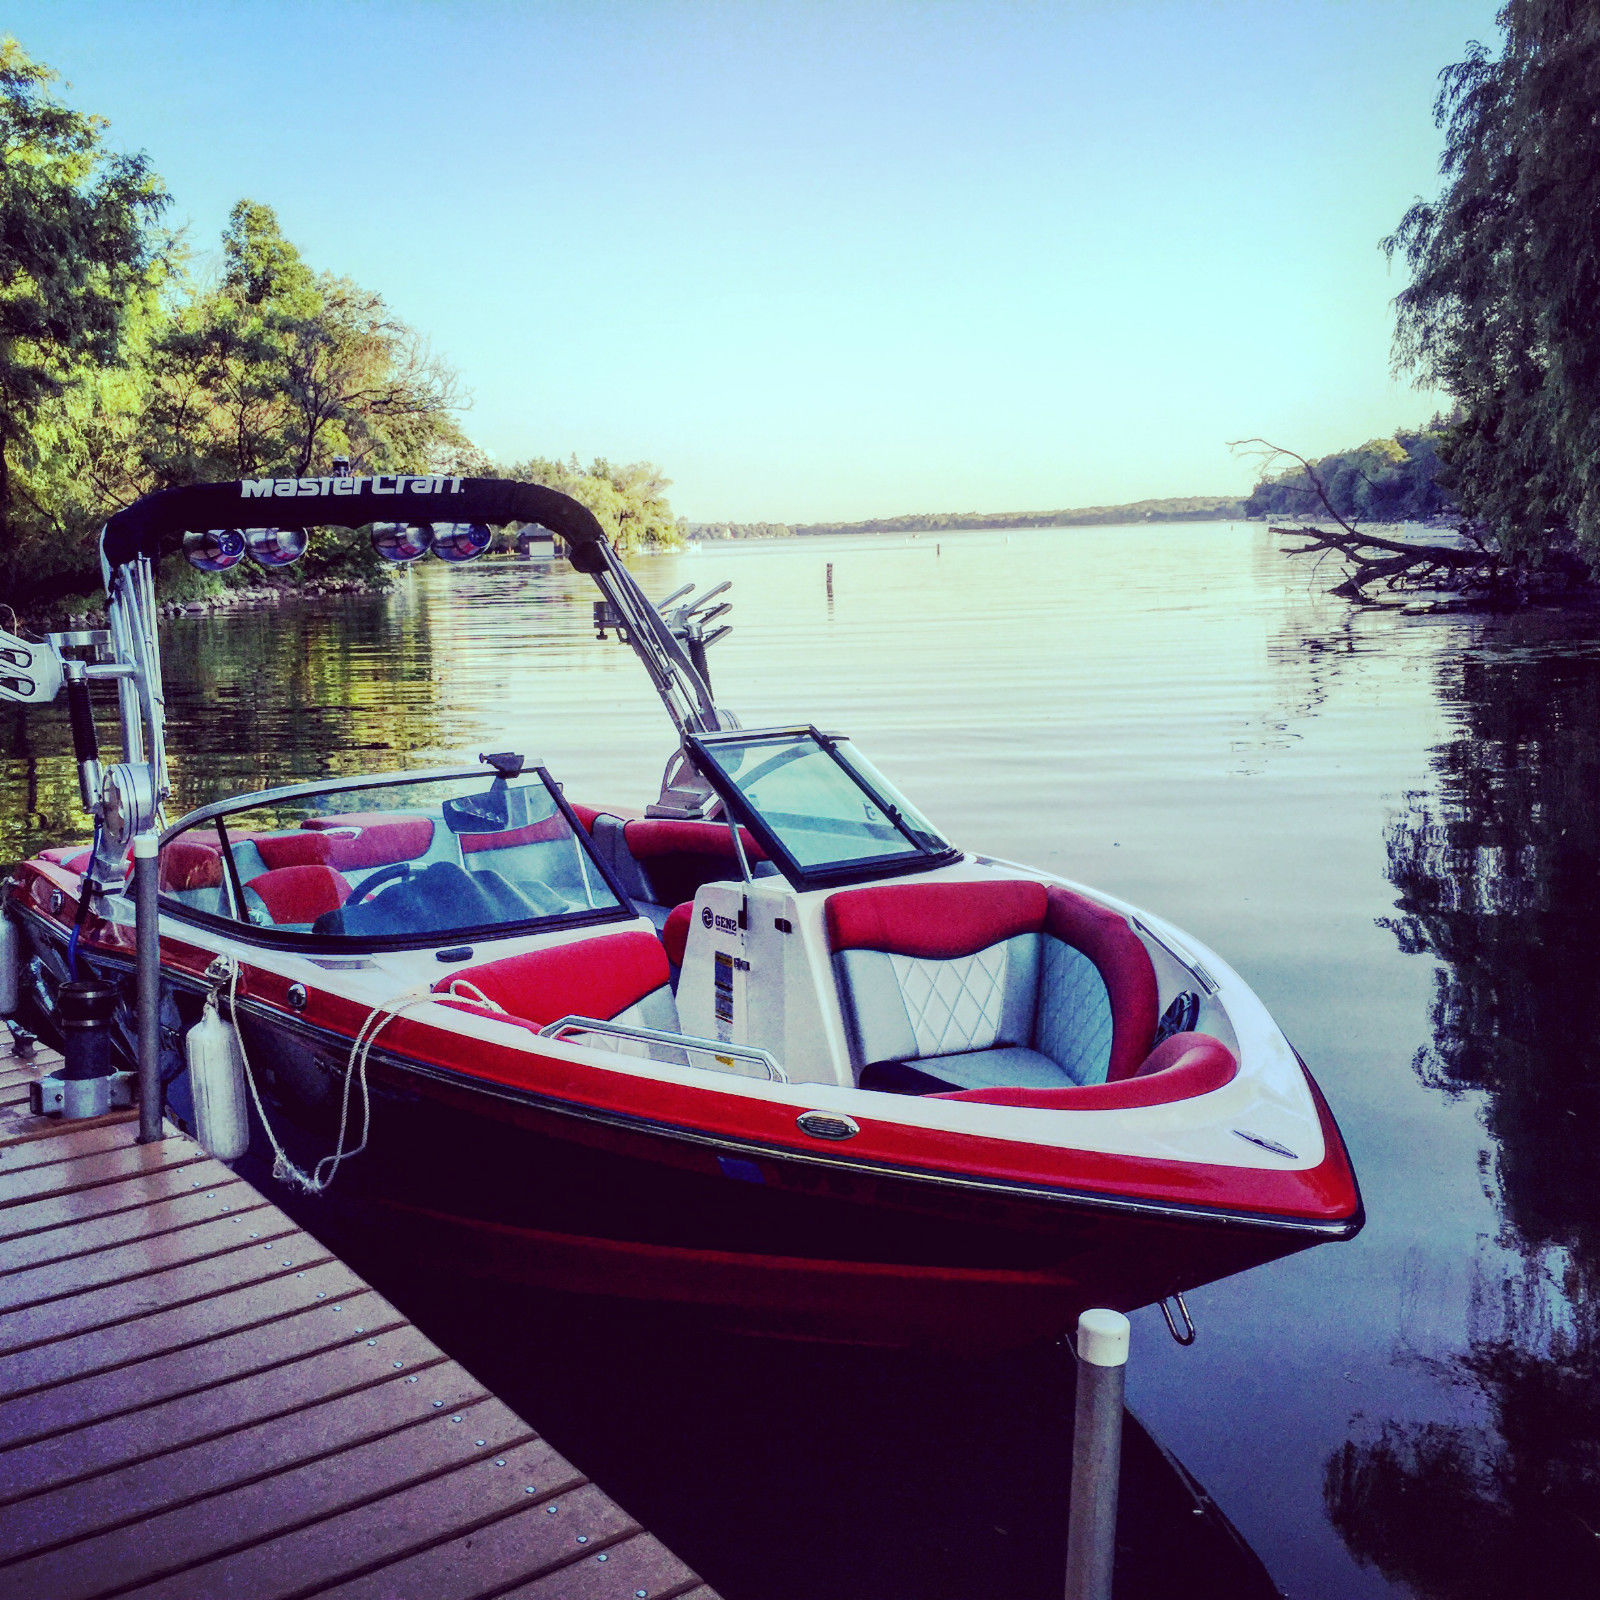 Mastercraft X10 2014 for sale for $87,850 - Boats-from-USA.com